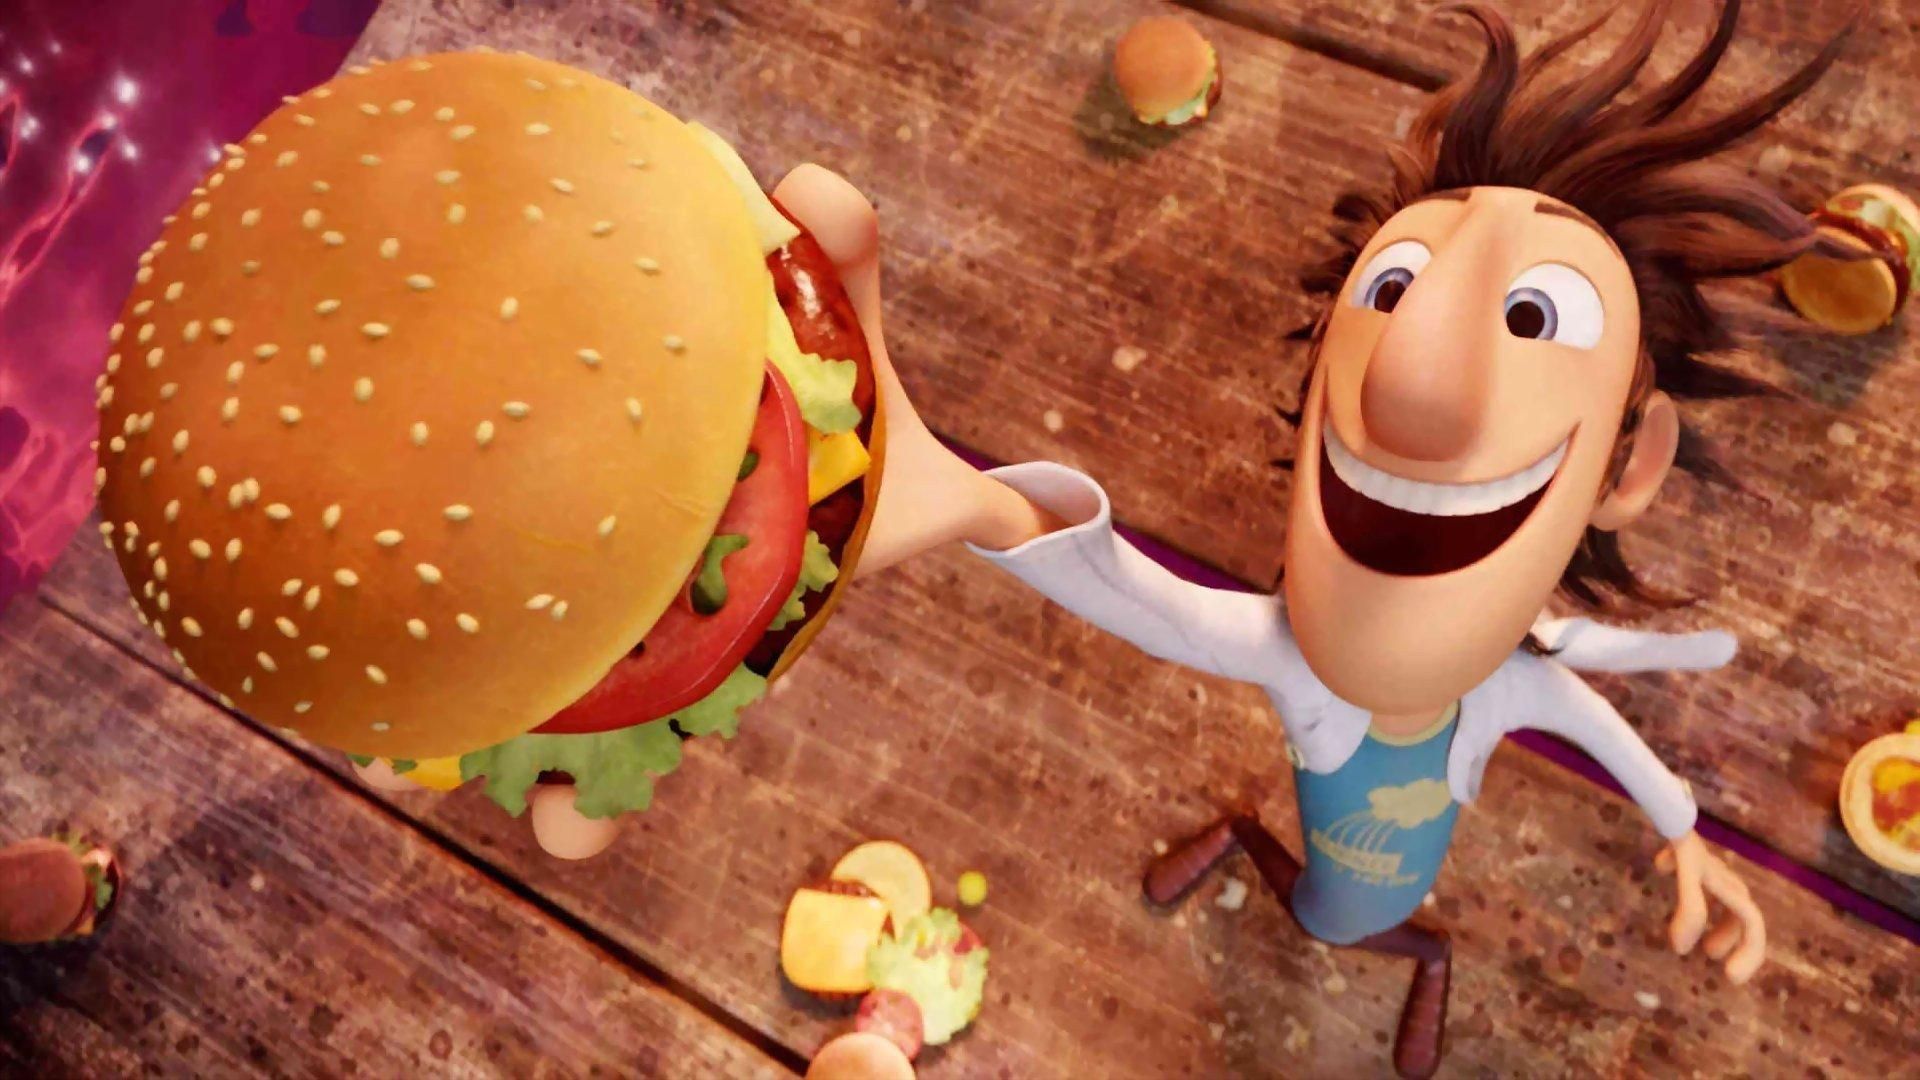 Cloudy with a Chance of Meatballs(2009) - Watcha Pedia.